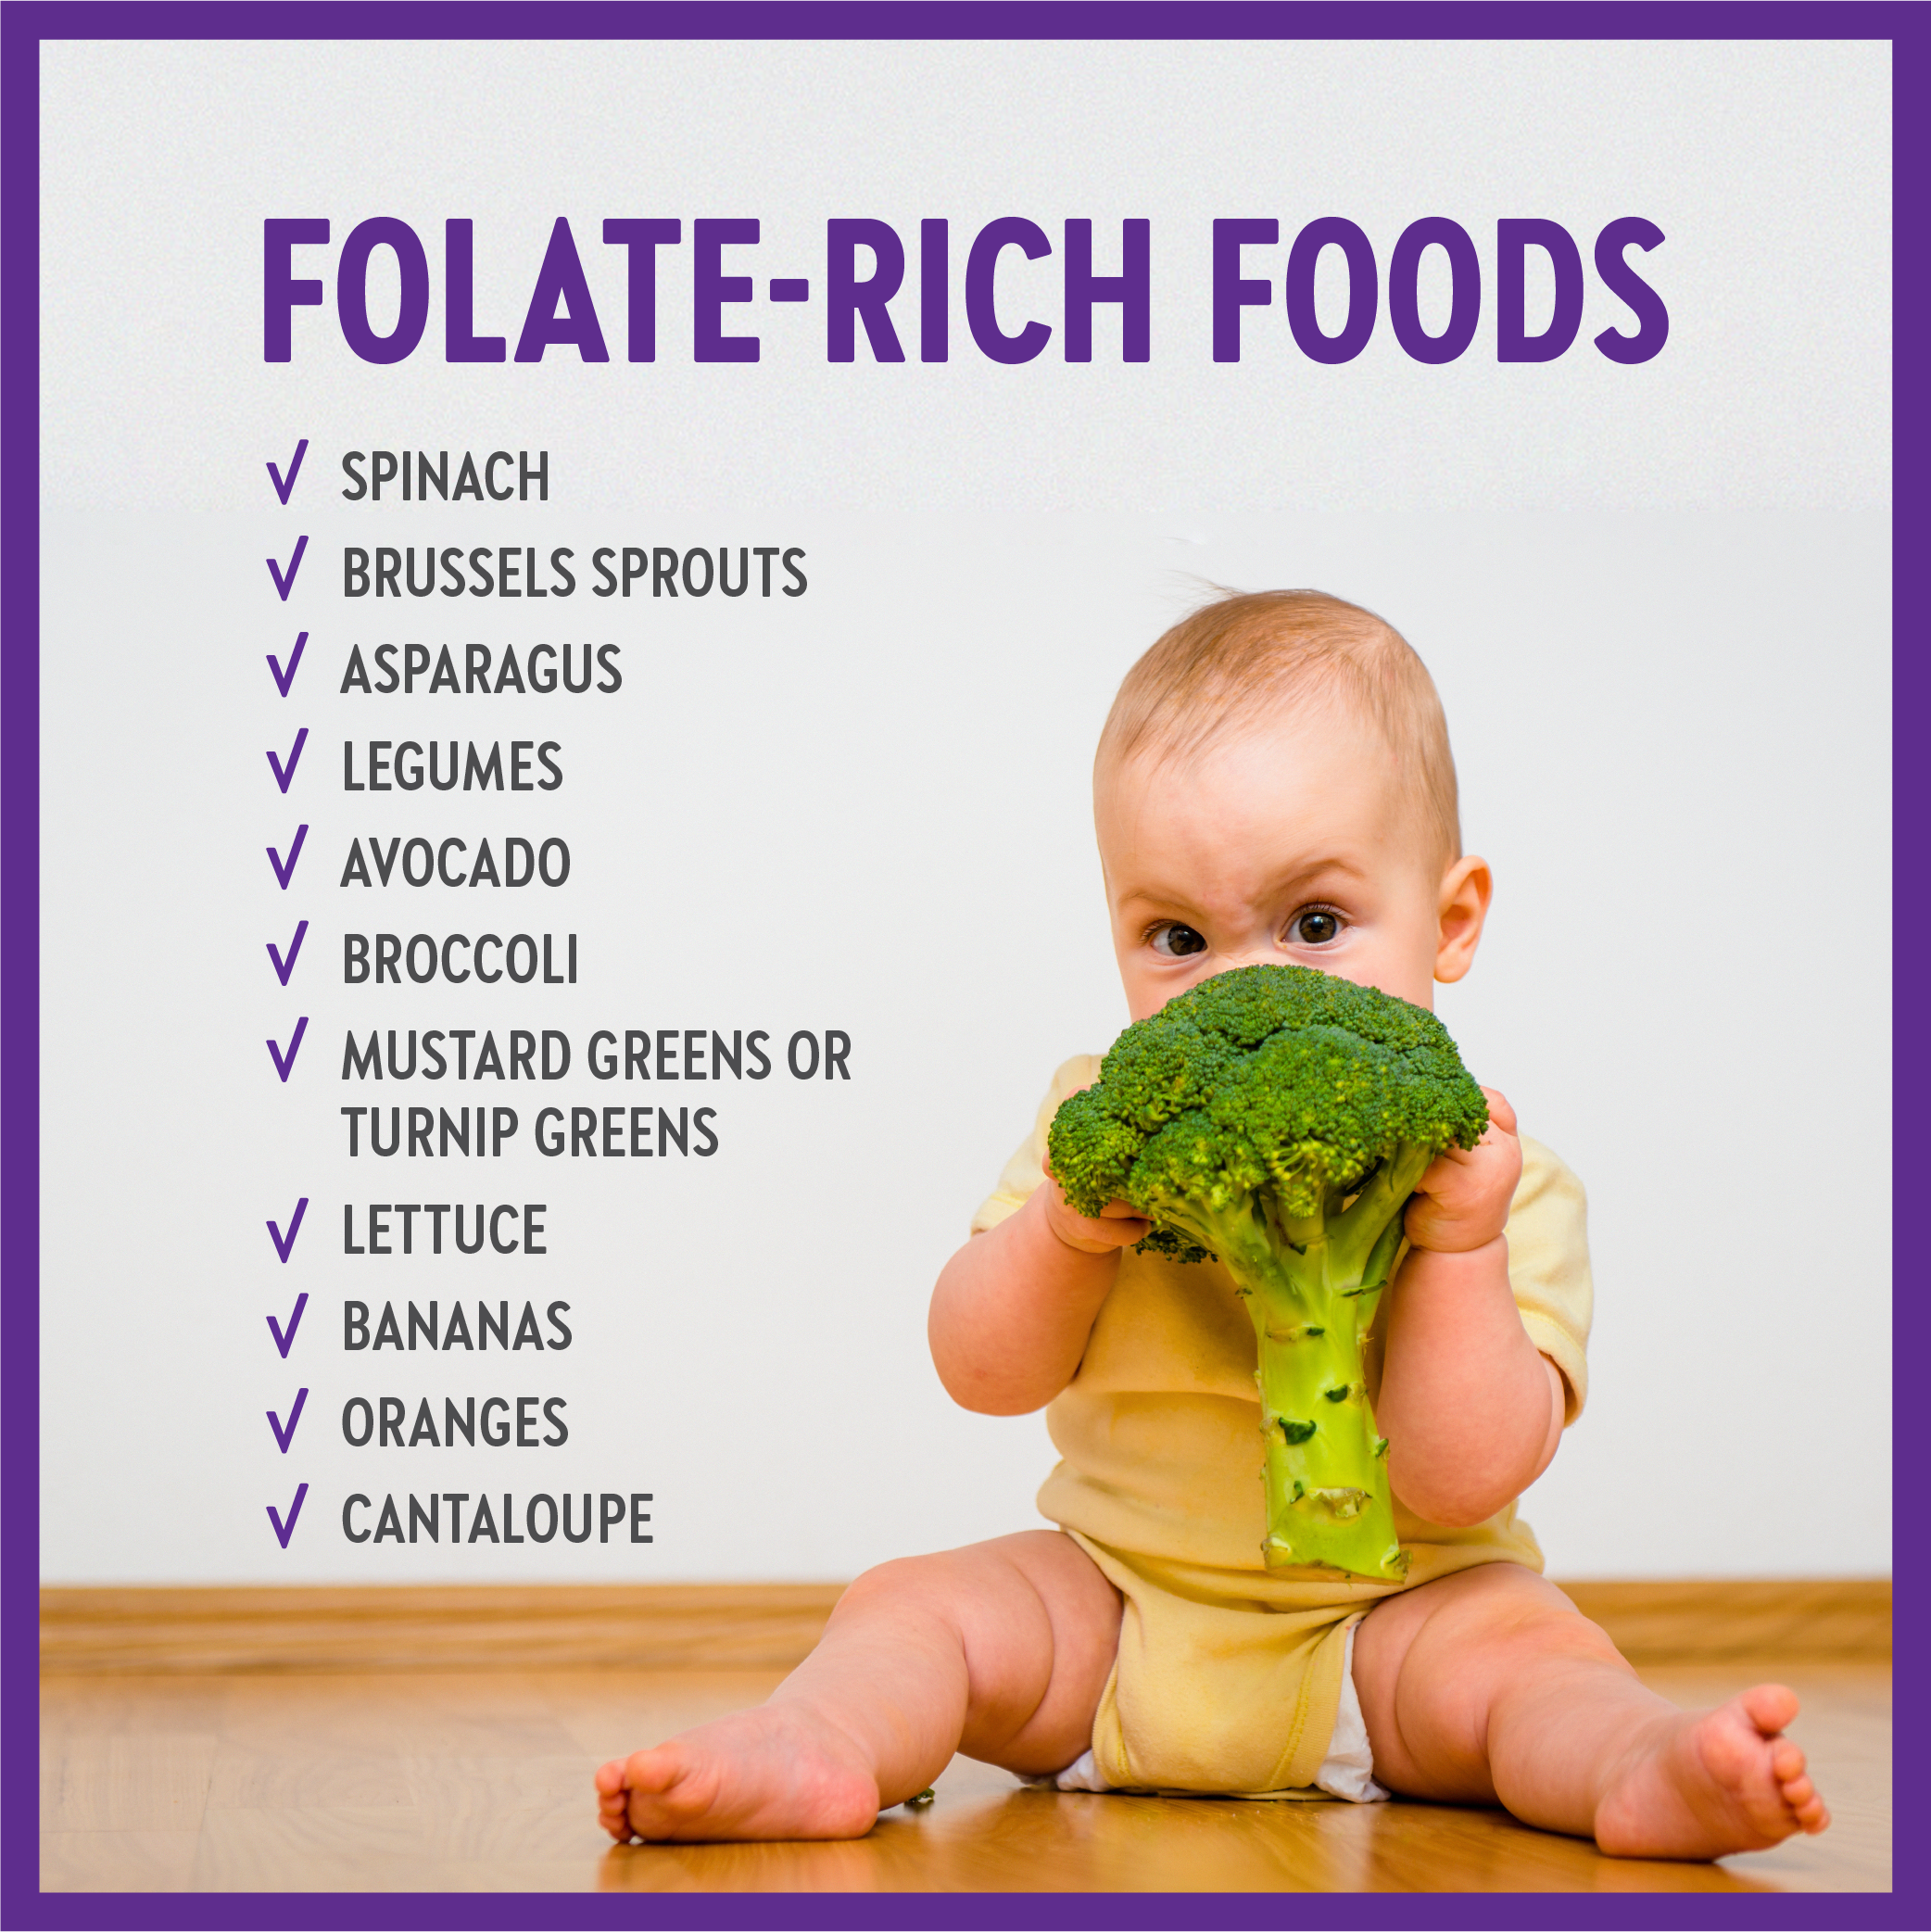 Folate-rich foods